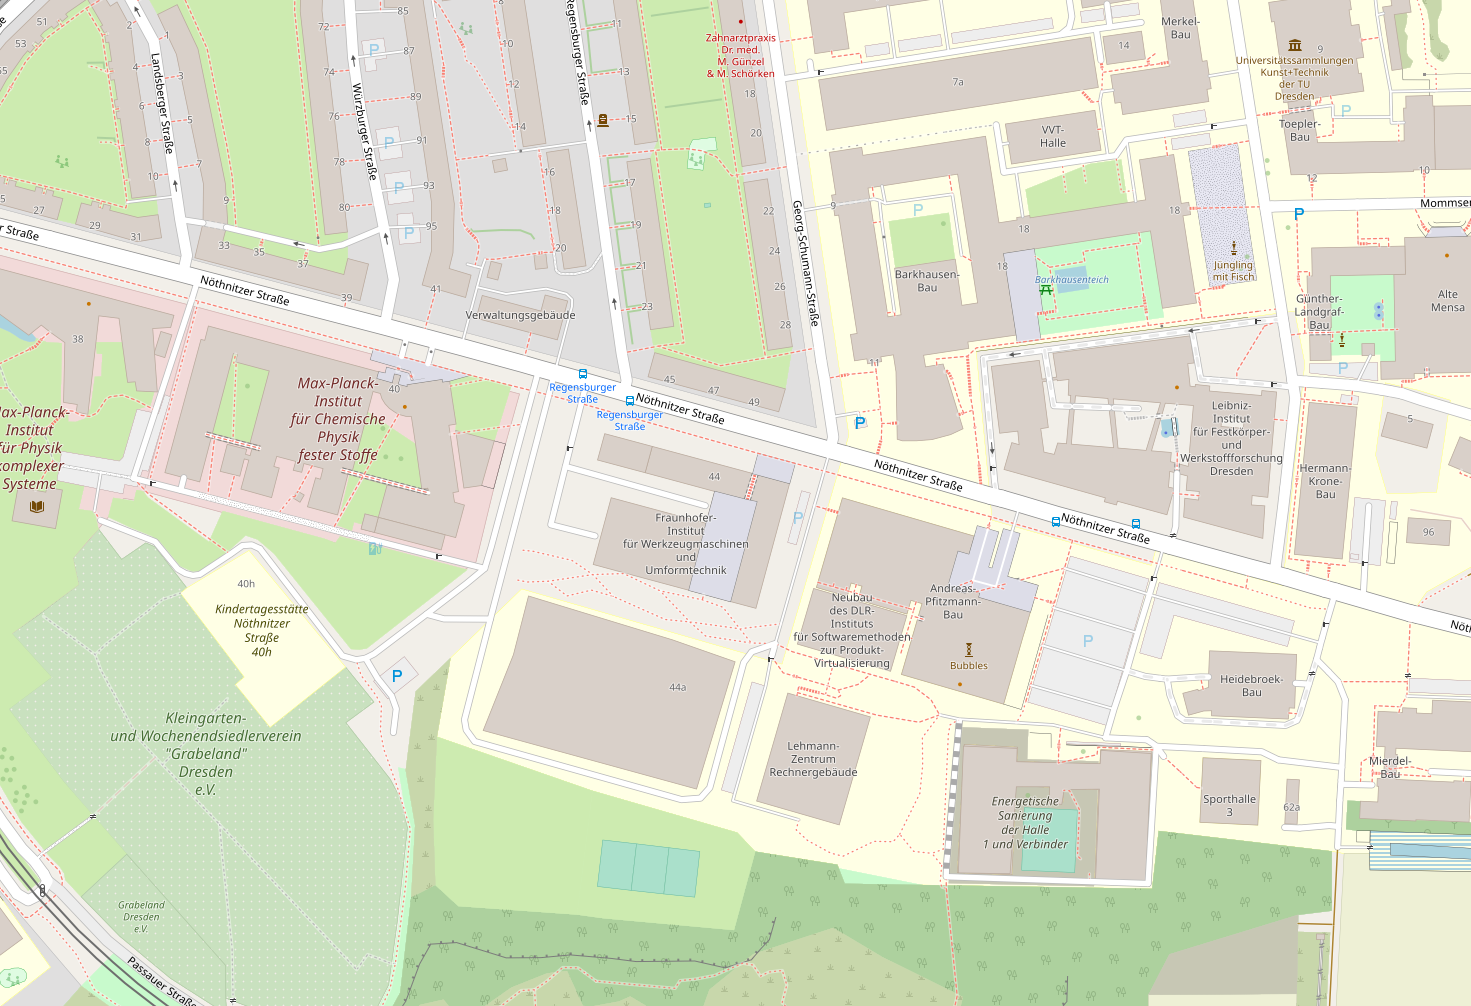 Section of an OSM map in the area of Nöthnitzerstraße in Dresden. The Andreas-Pfitzmann-Bau (visiting address) is located about in the middle in the lower half of the section